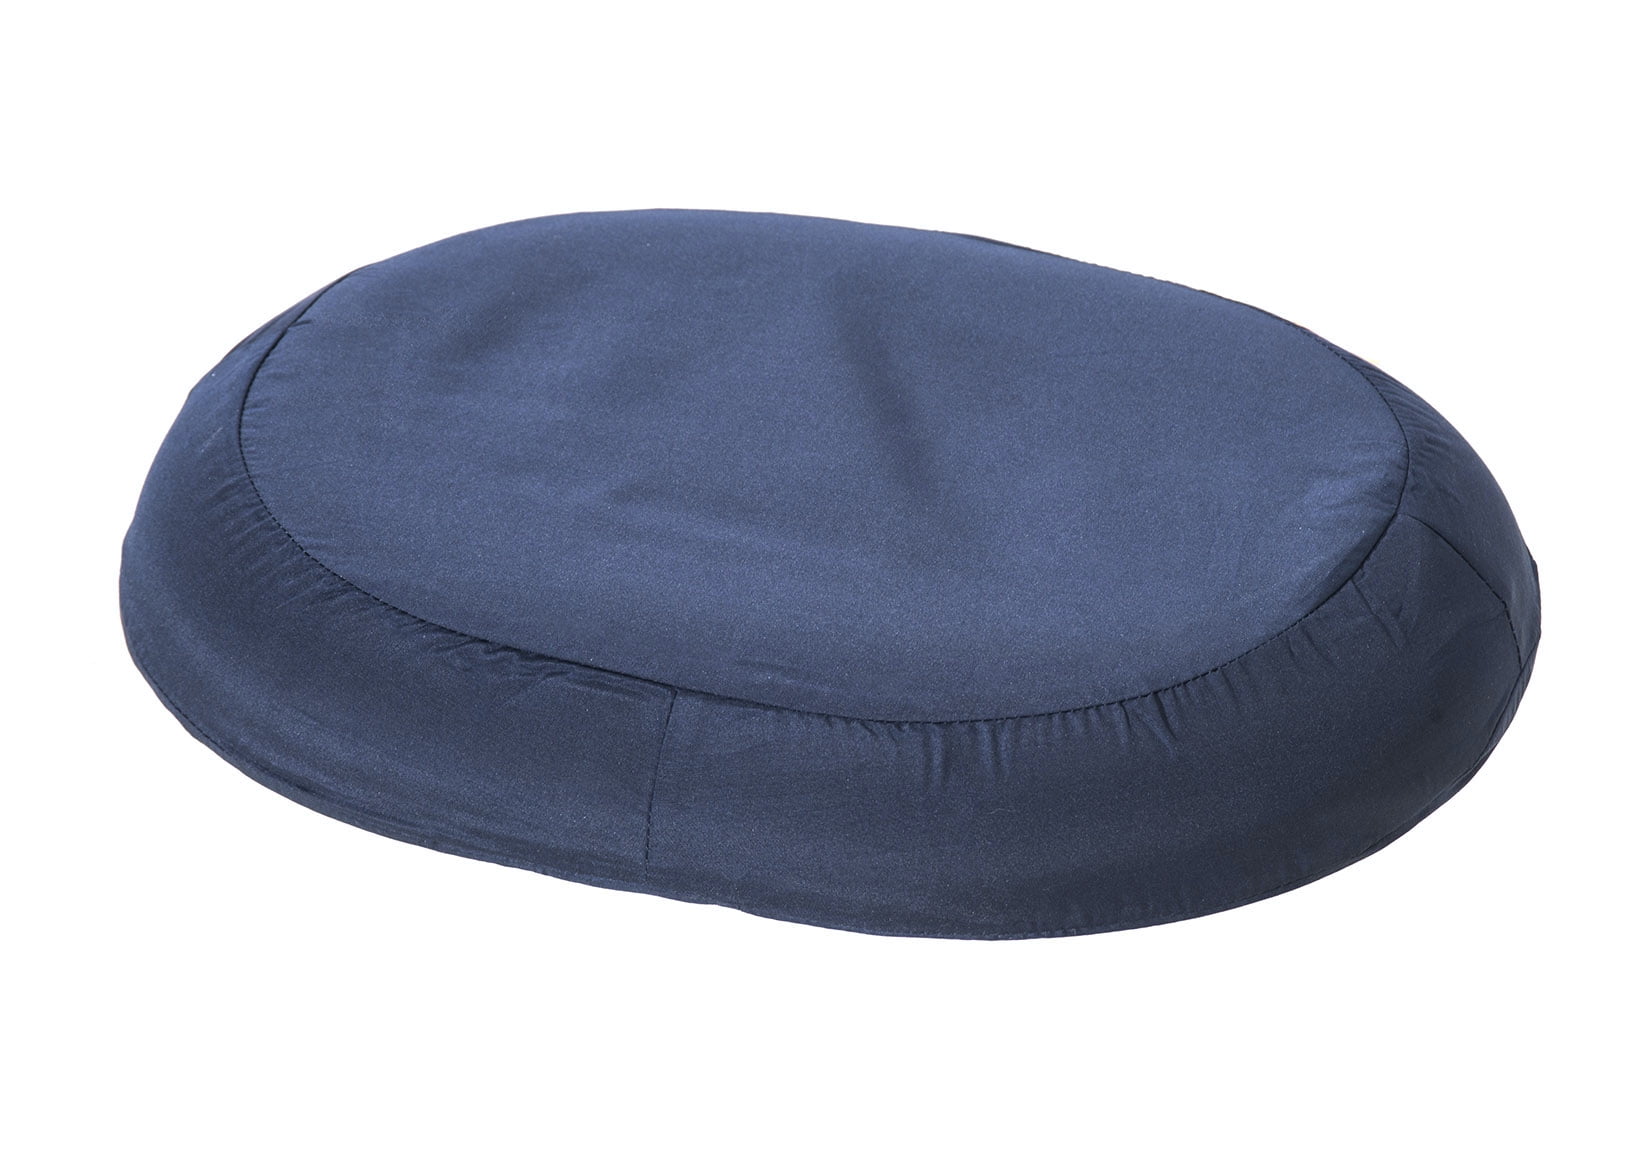 Medex East Africa - Donut cushions are ideal for individuals who